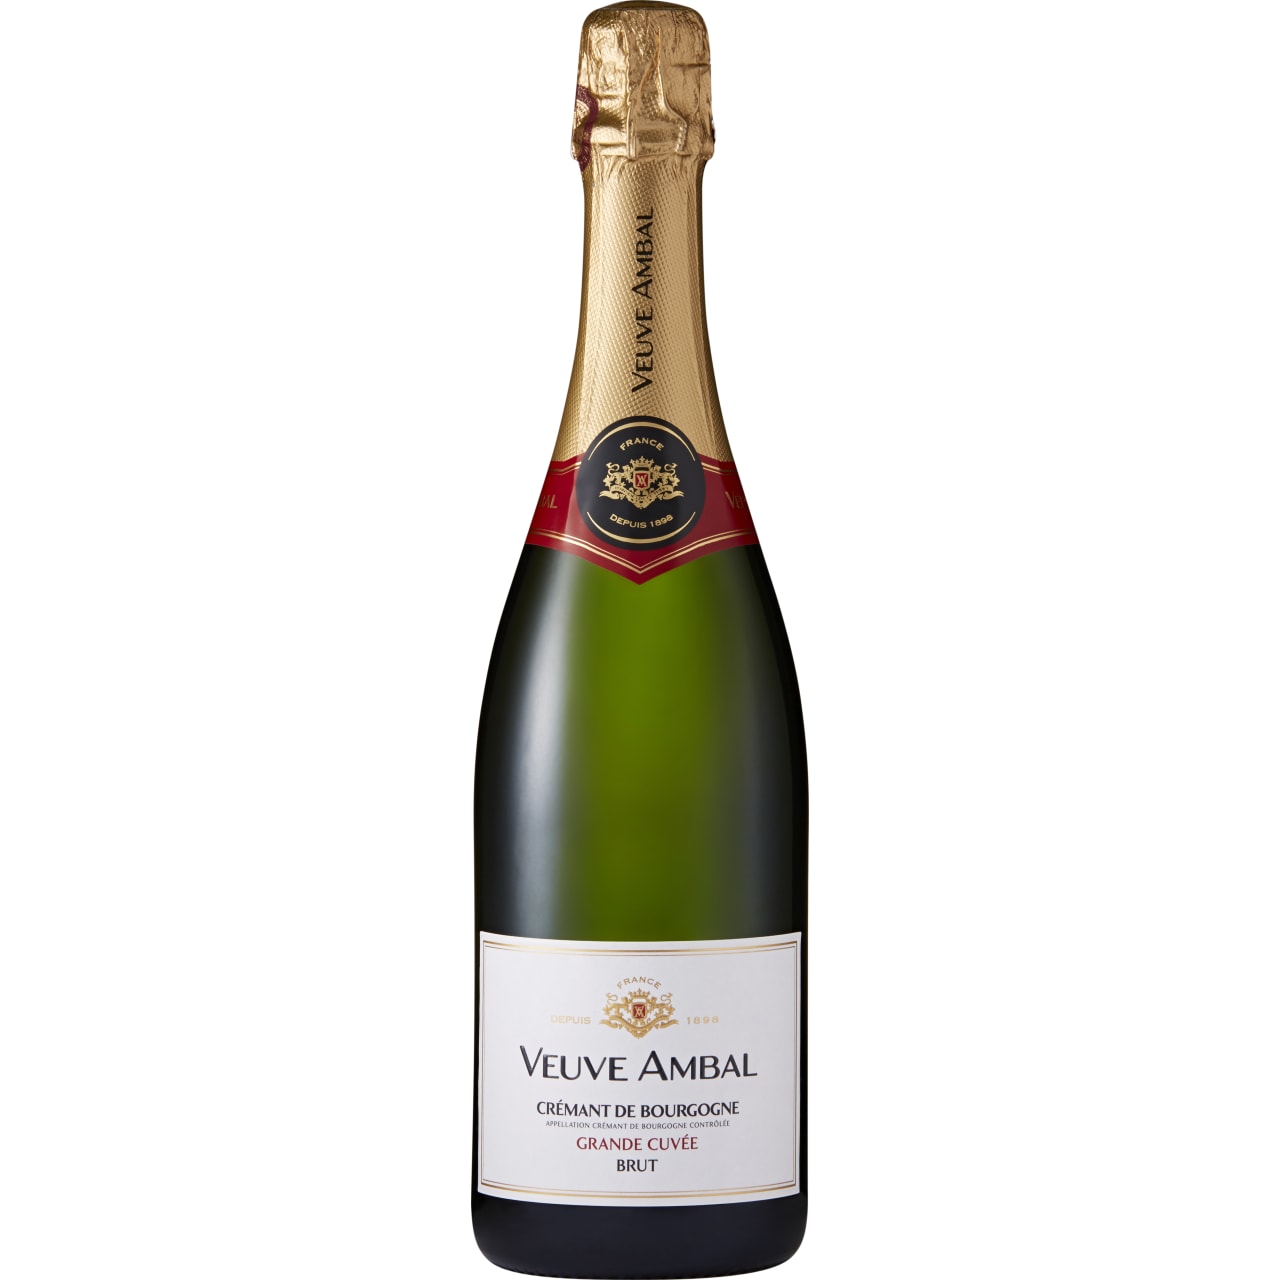 A blend of Chardonnay and Pinot Noir, this Burgundy Crémant offers remarkable complexity. It is full, well-structured and balanced on the palate. Aromas of red and citrus fruits dominate, but the nose has hints of flowers and butter too.